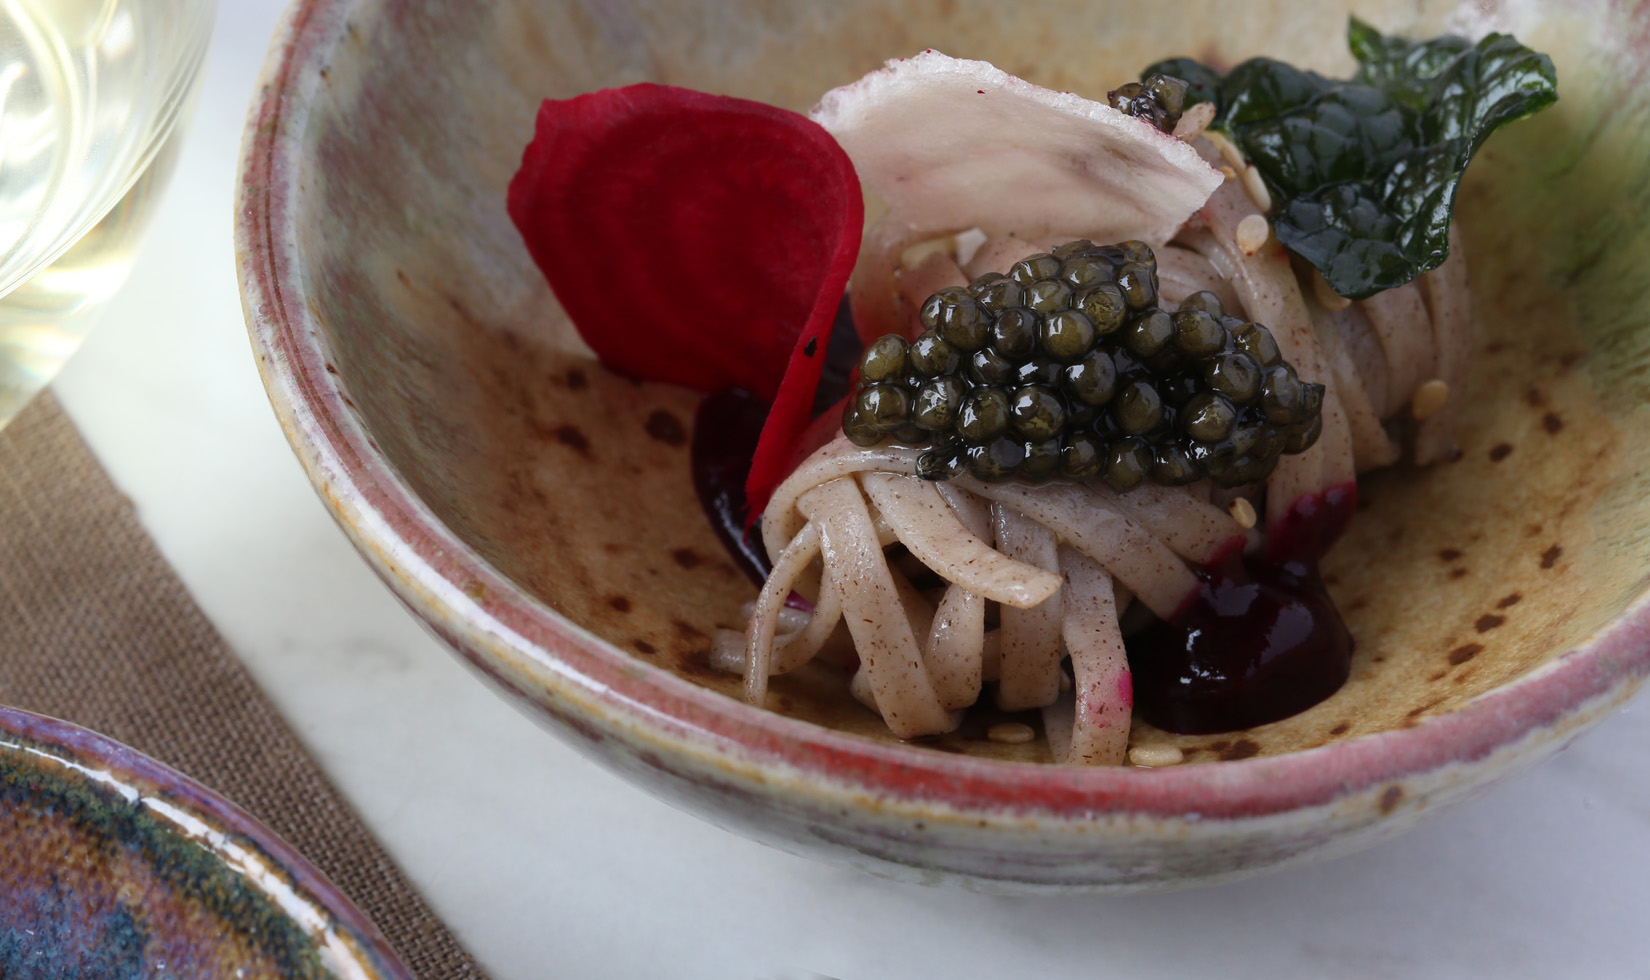 Soba Noodles with Caviar, Beets and Kale Purée Recipe